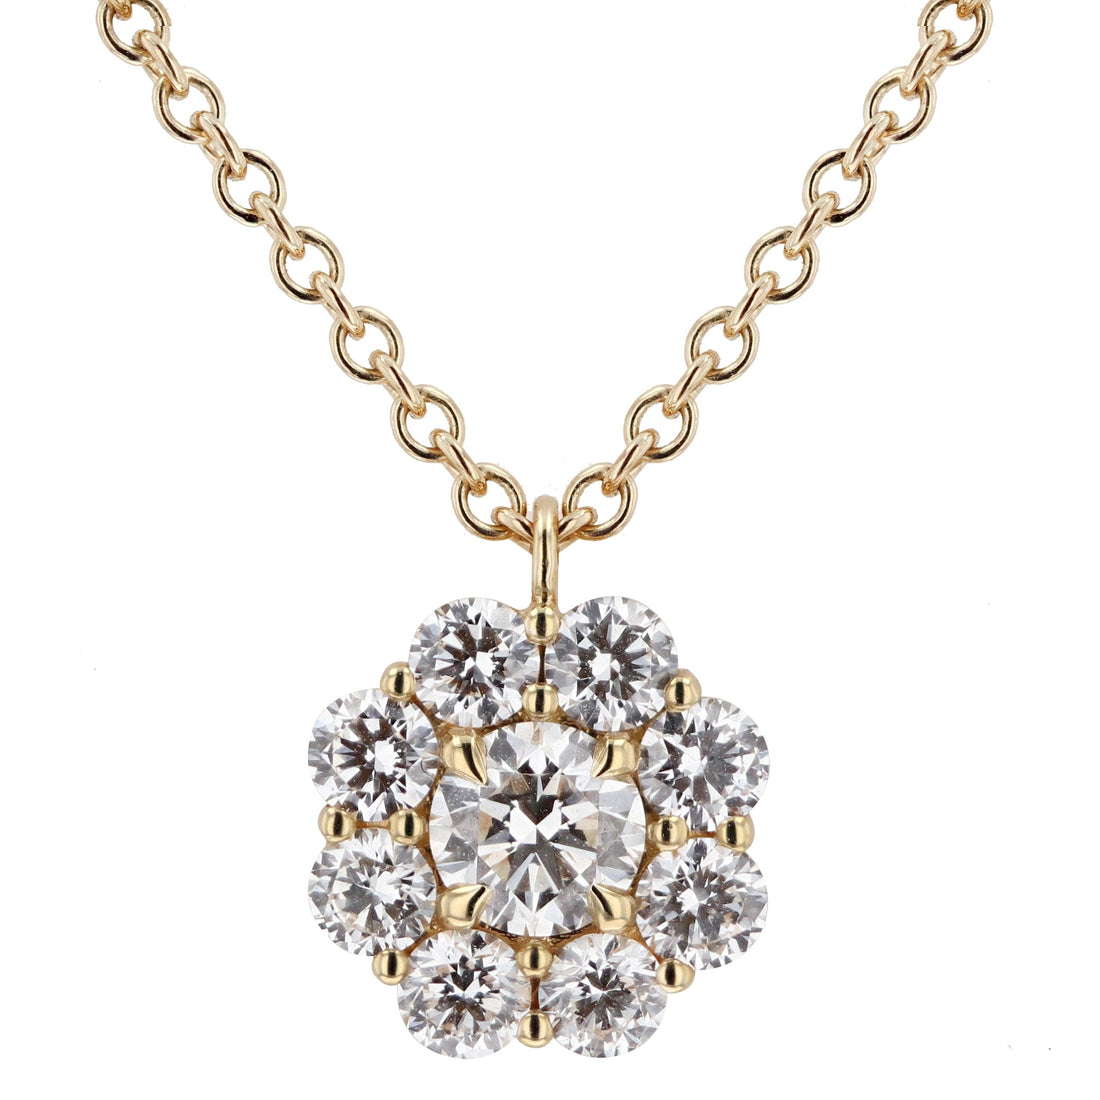 Skeie's Legacy Collection Diamond Cluster Pendant Necklace in Yellow Gold - Skeie's Jewelers